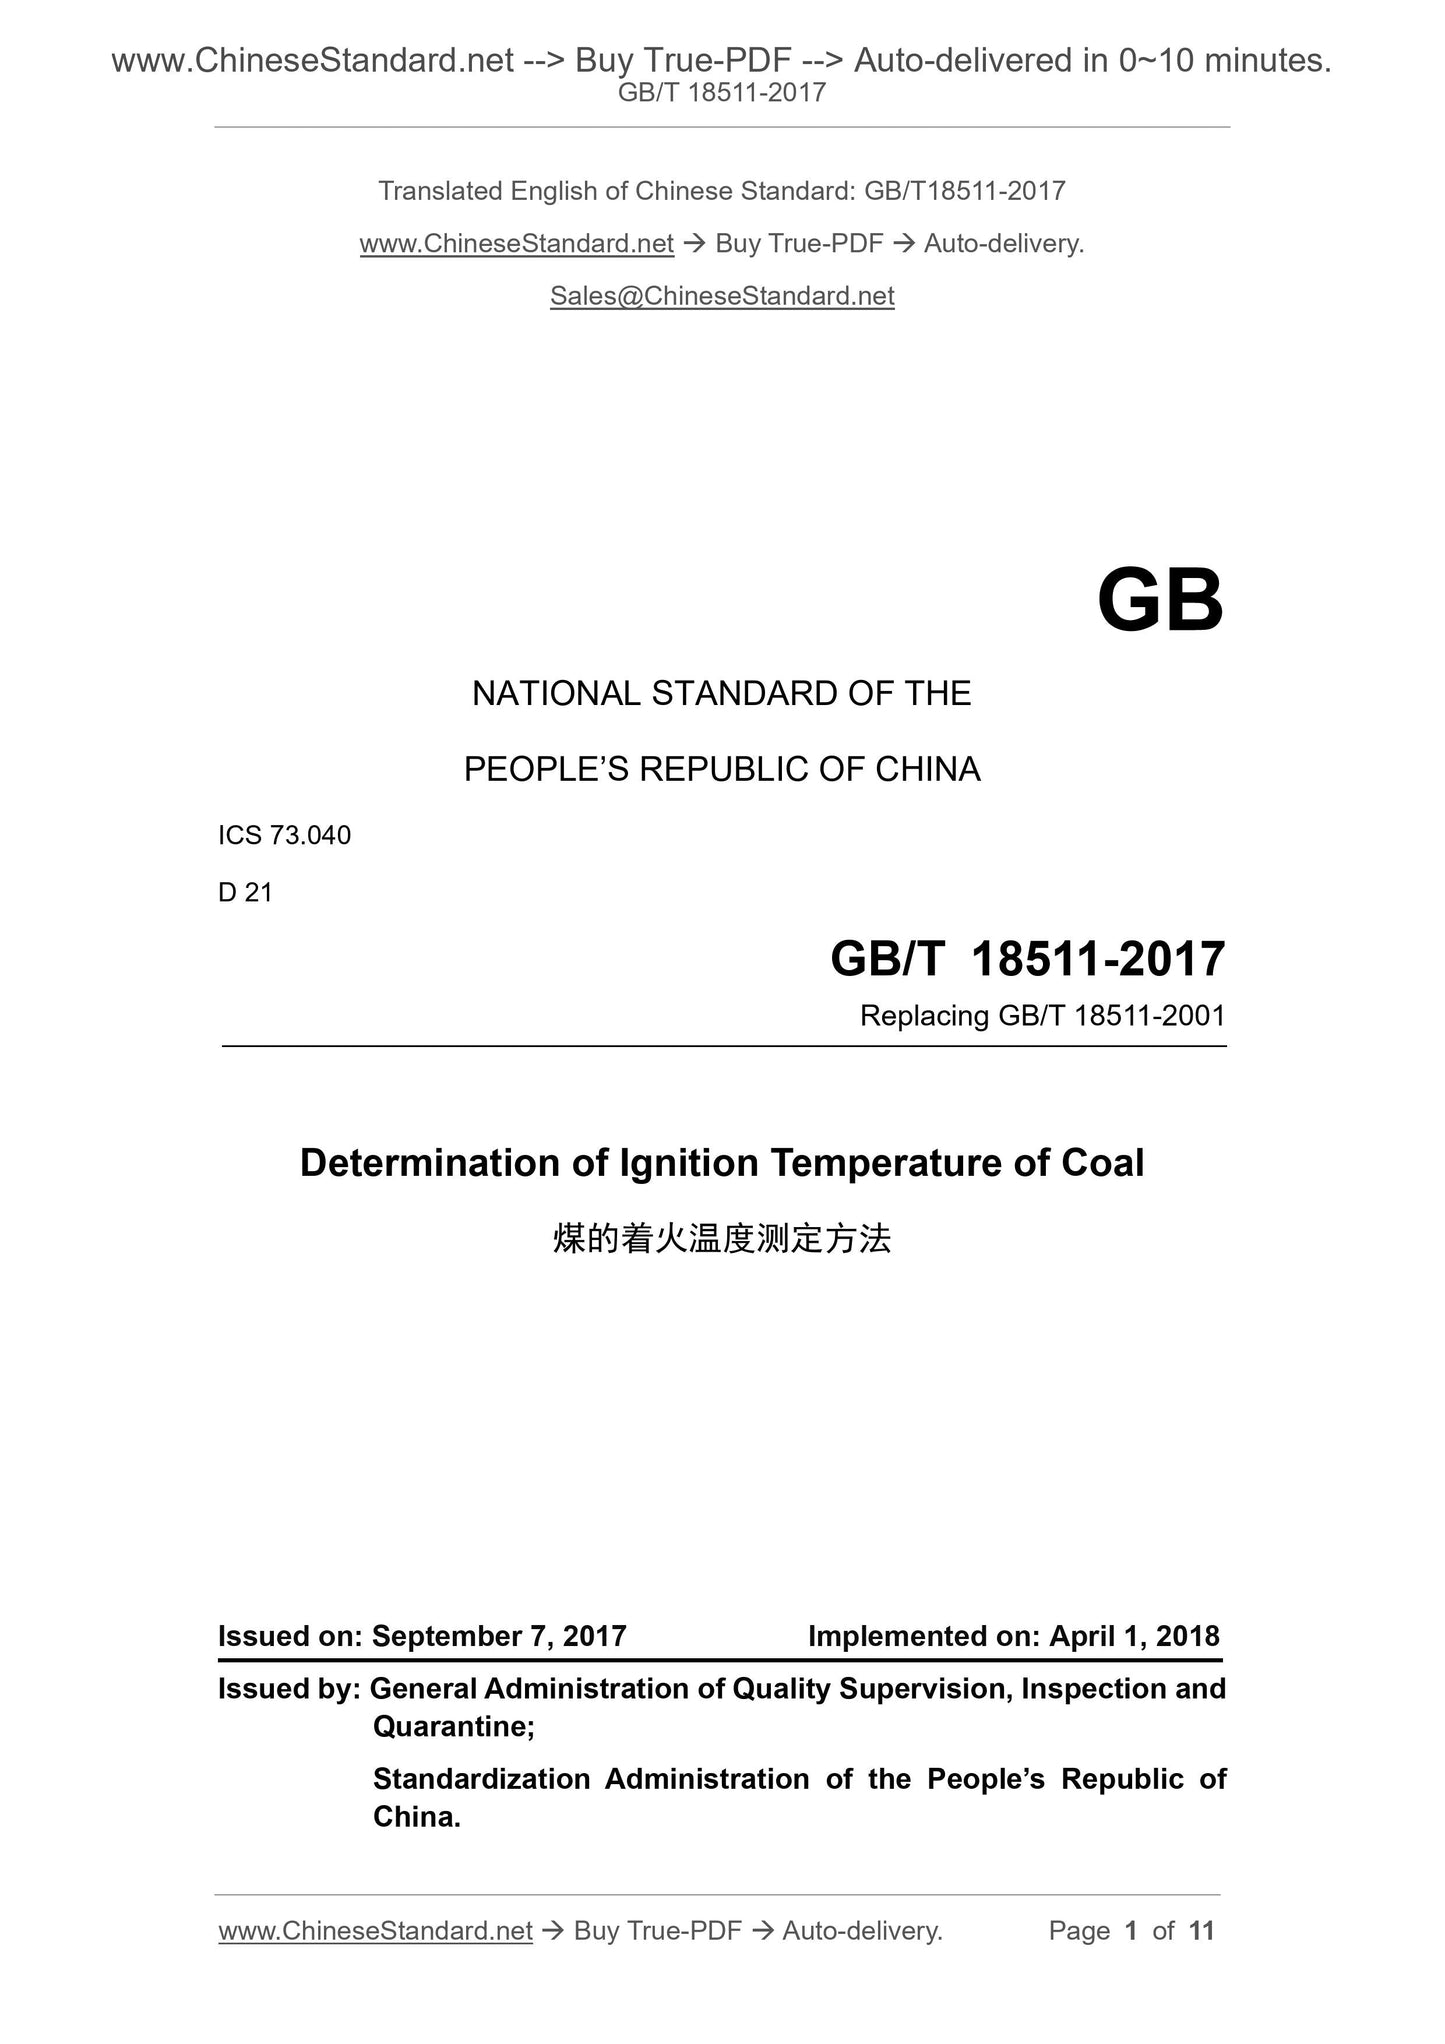 GB/T 18511-2017 Page 1